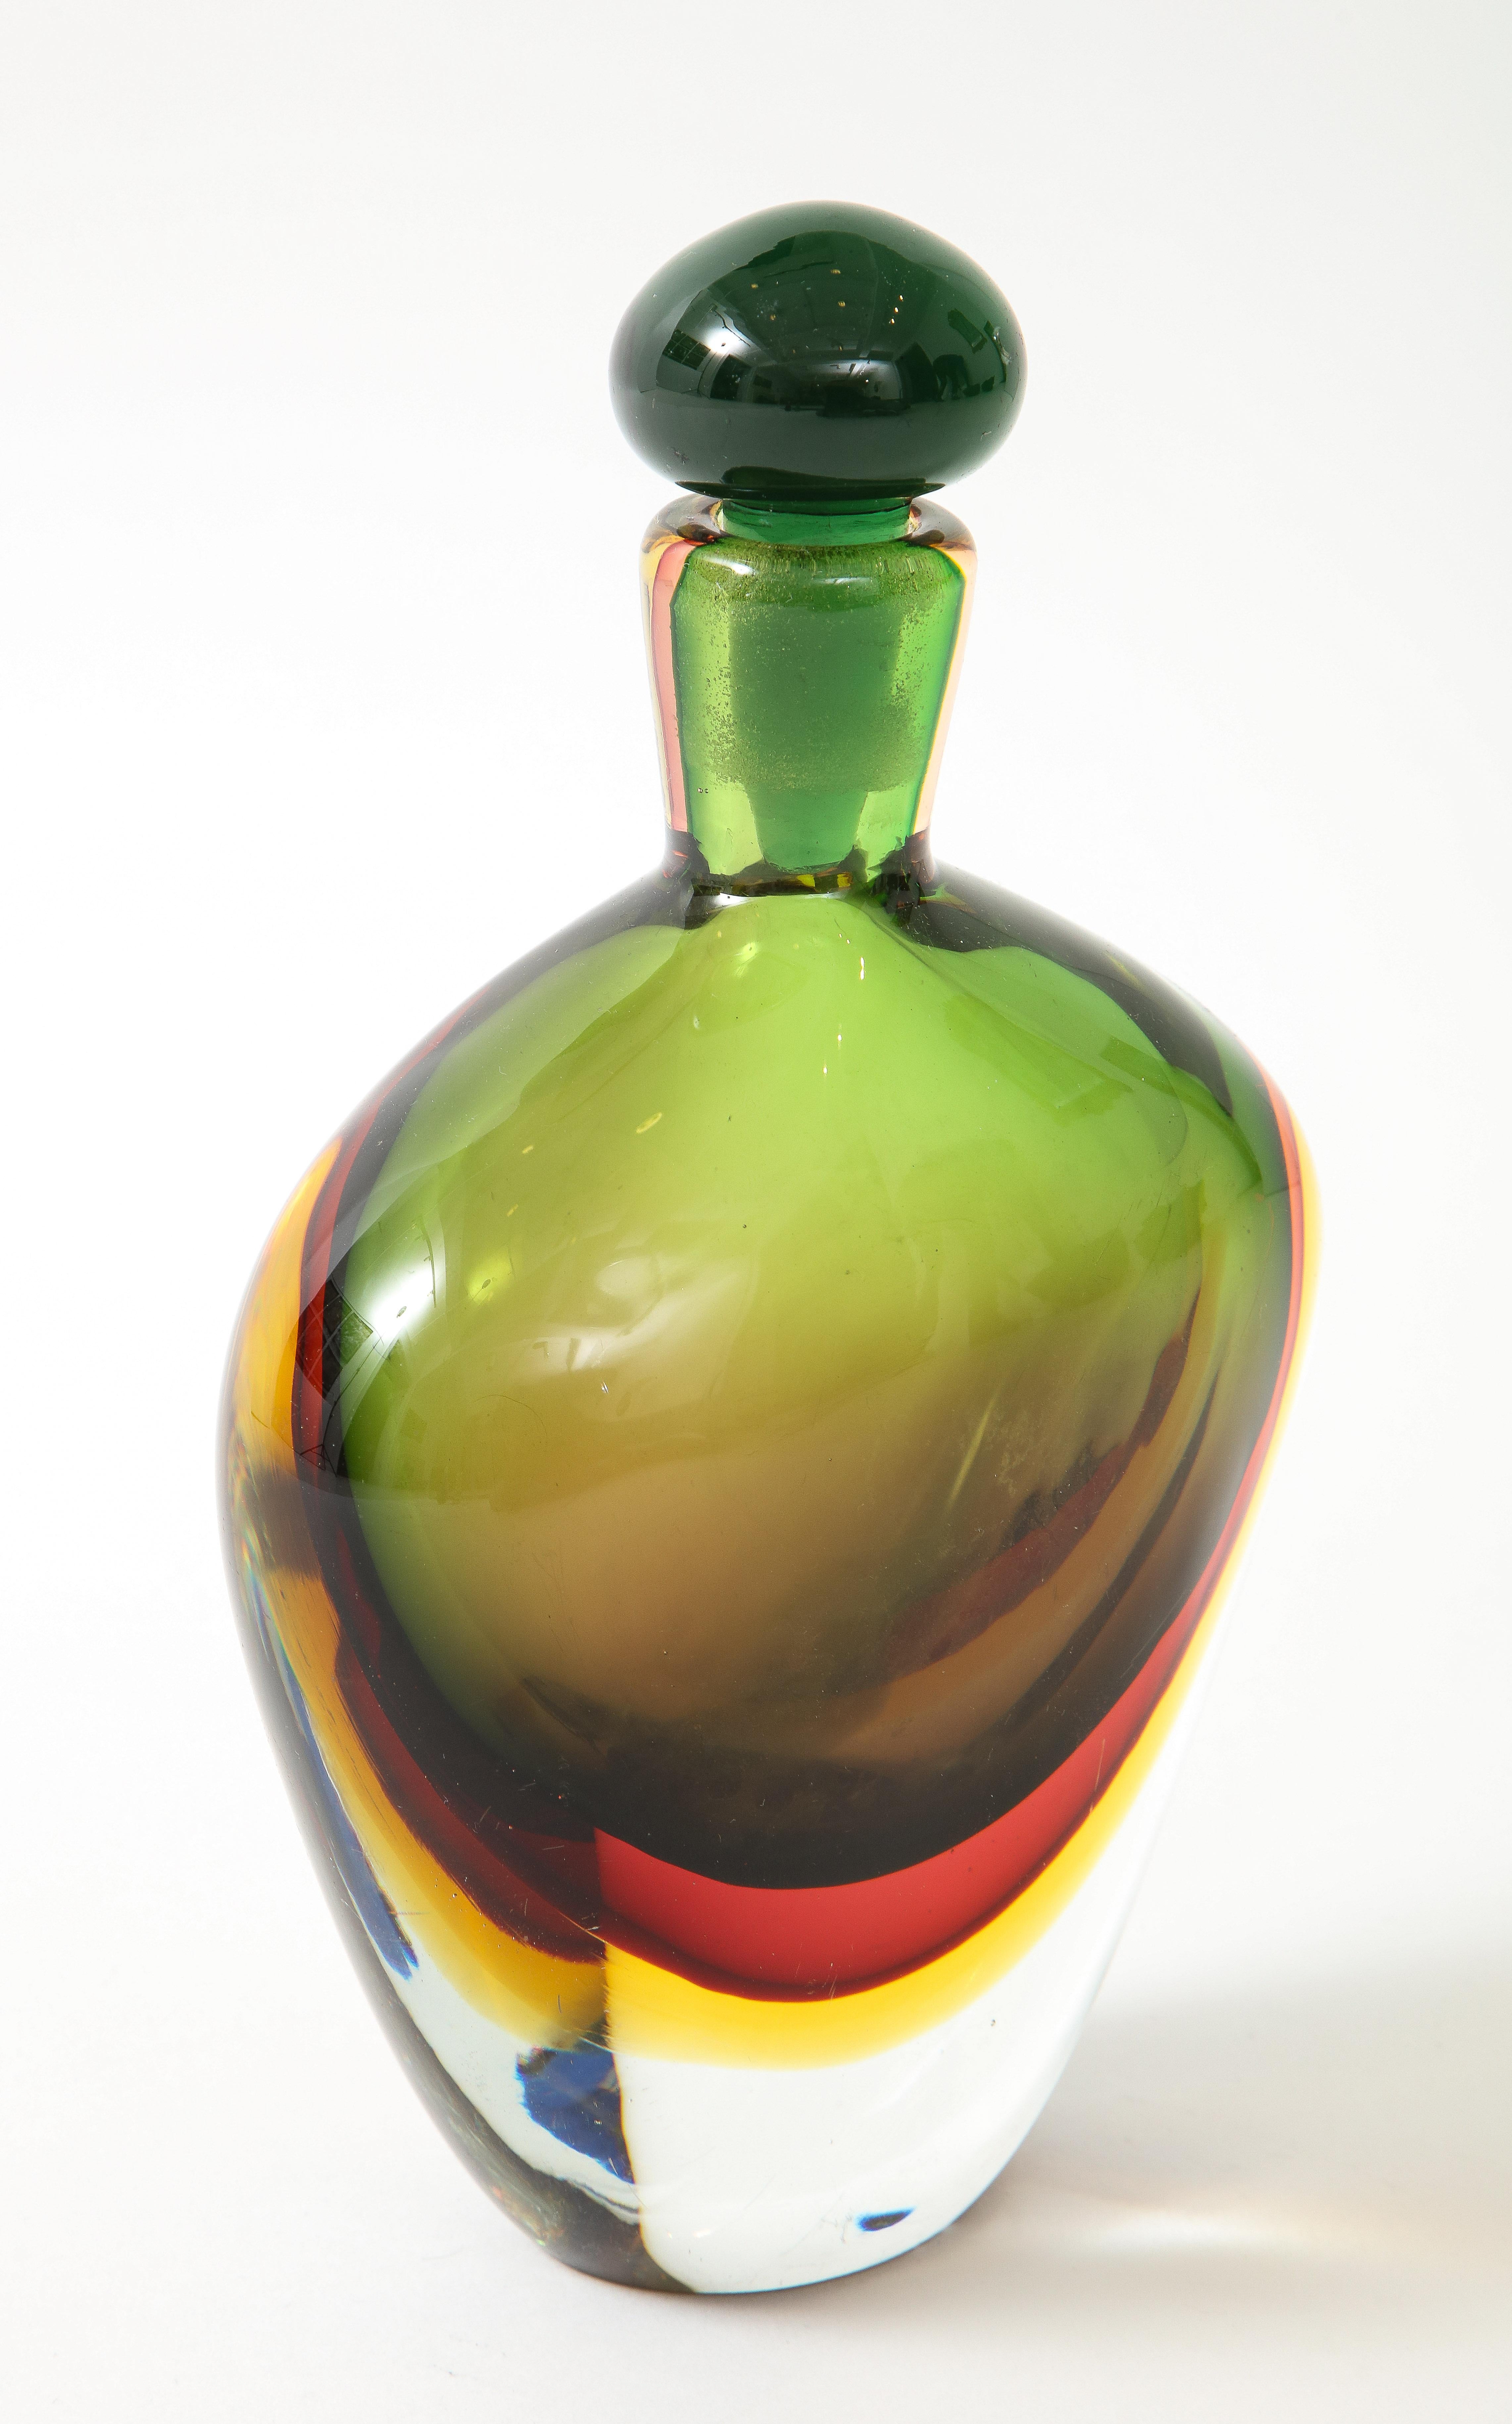 Seguso Vetri d'Arte elegant bottle with stopper, Italy, 1960s. This exquisite piece was made using the Sommerso technique of glassmaking in Verde Rosso Cinese Giallo colors - green, red, yellow. Although unsigned, it's documented in the Seguso